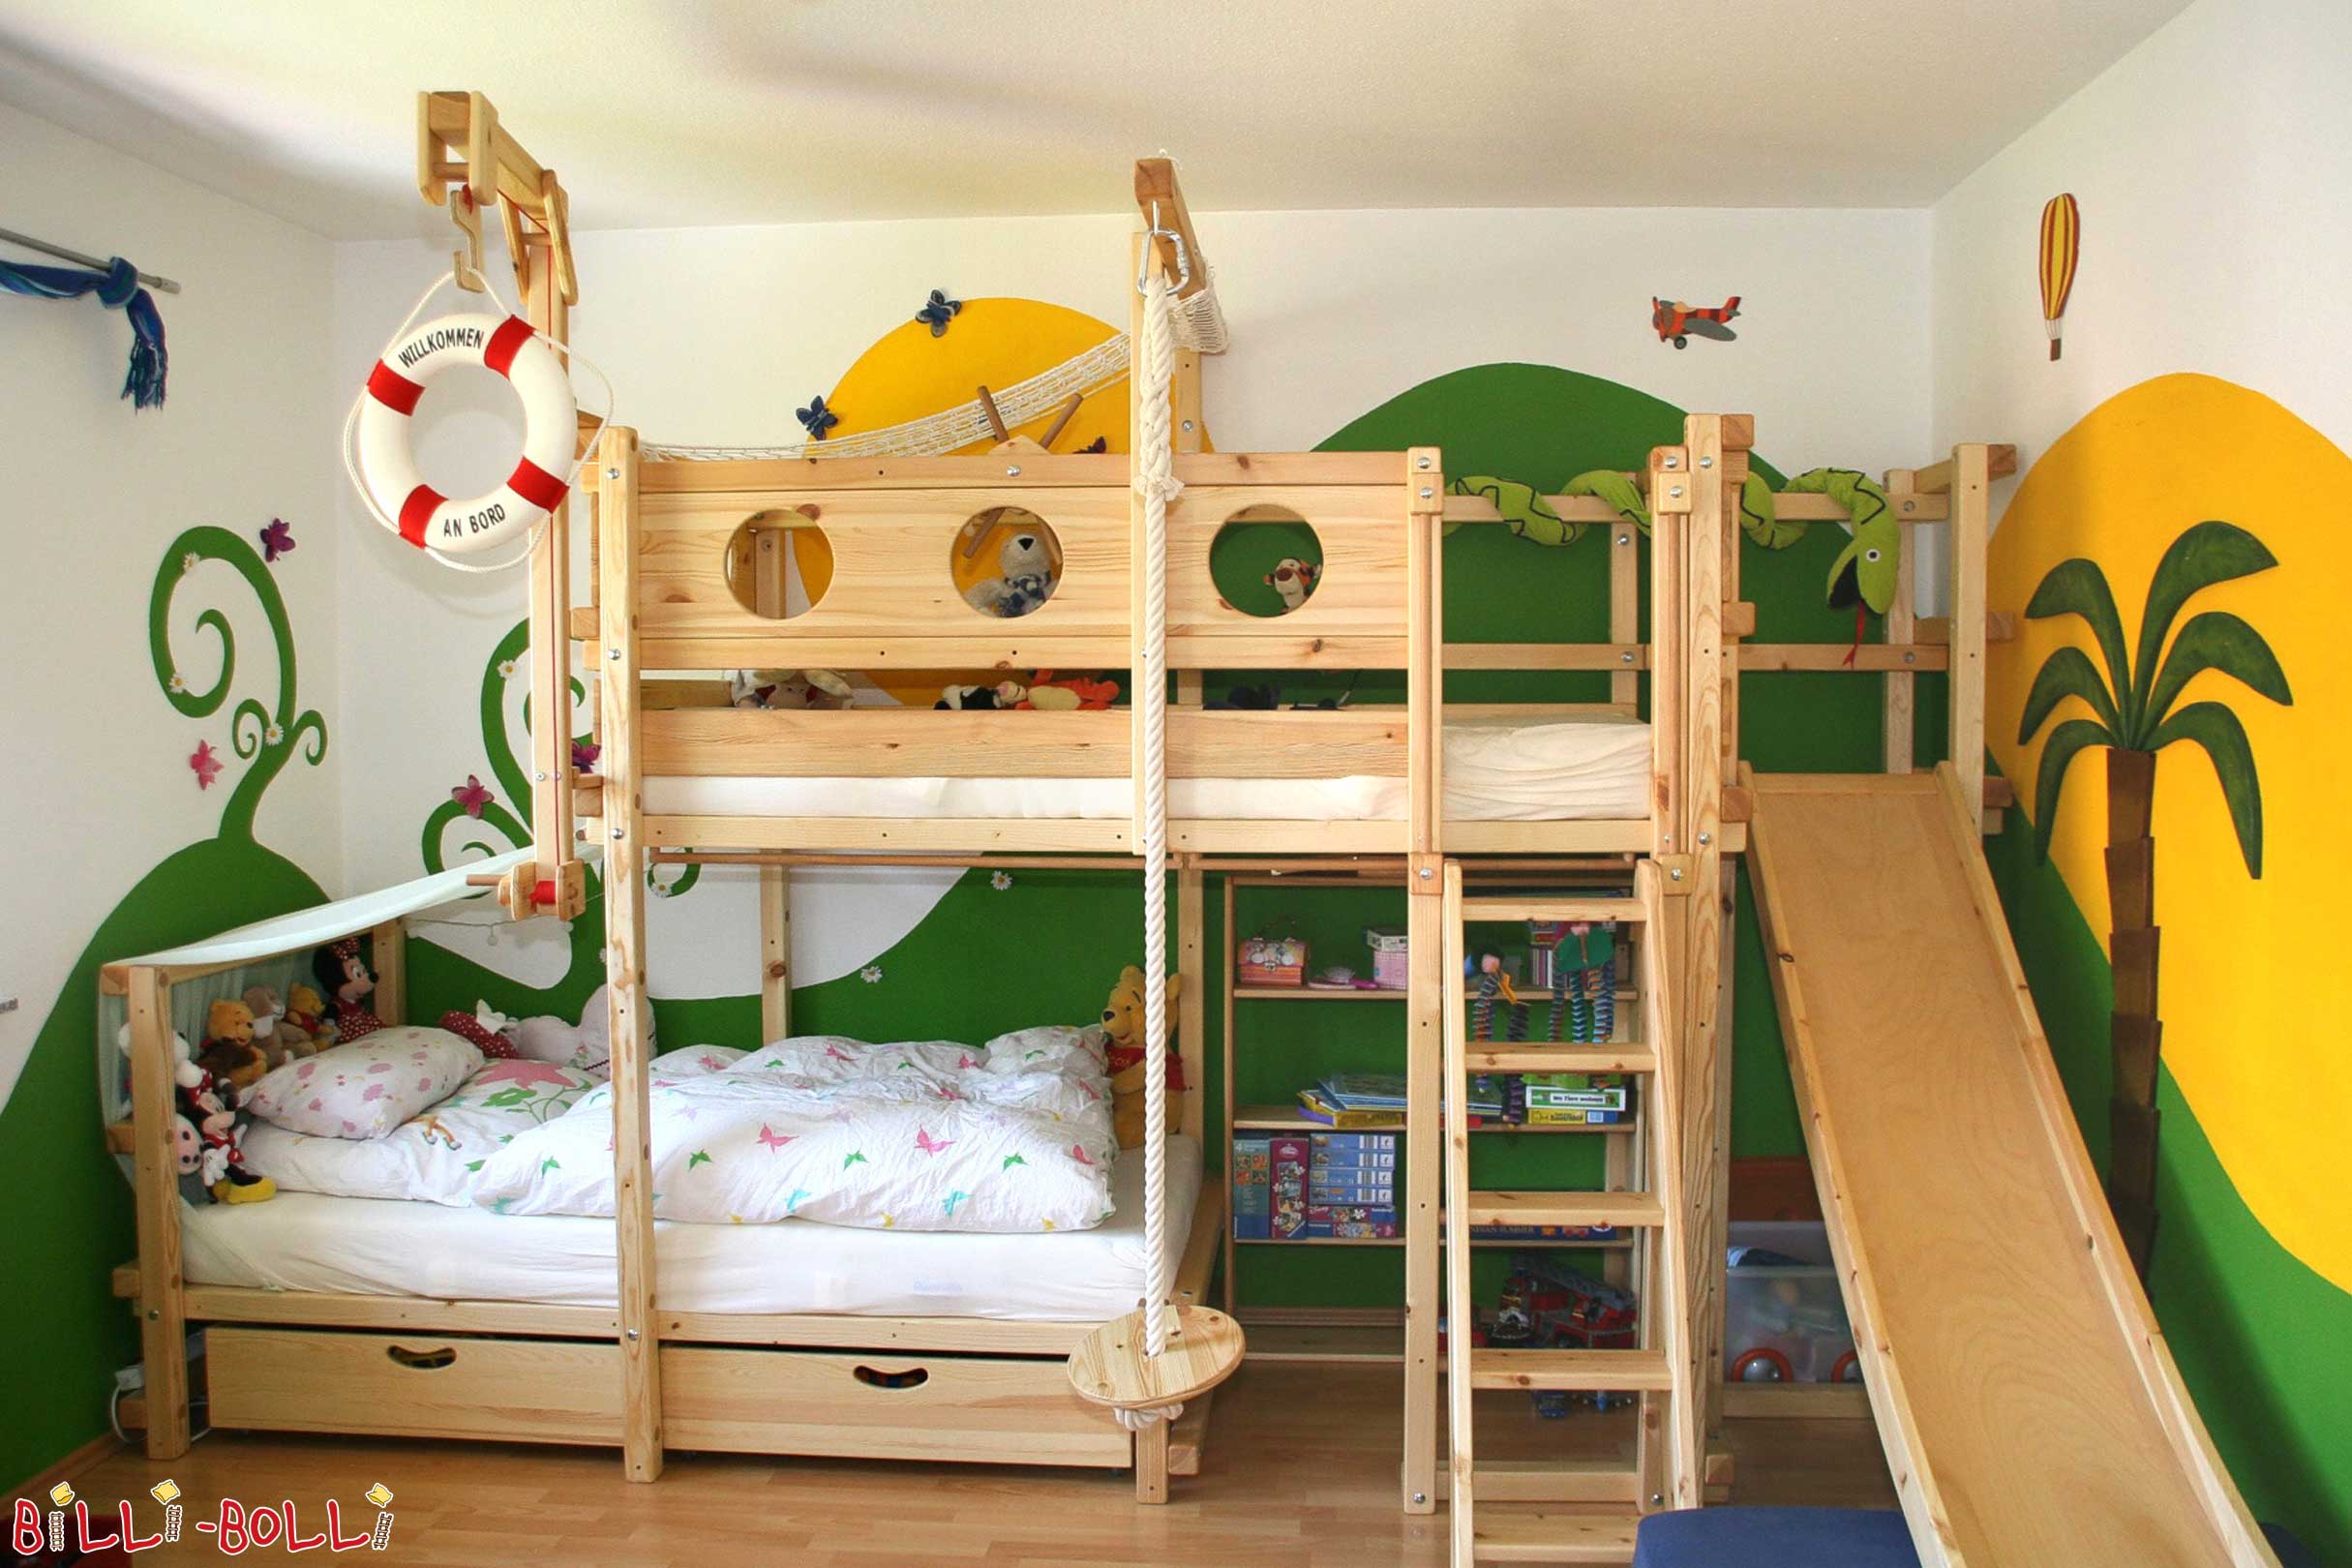 Dear Billi-Bolli team, A month ago, we mounted our pirate ship or fairy … (Bunk Bed Laterally Staggered)